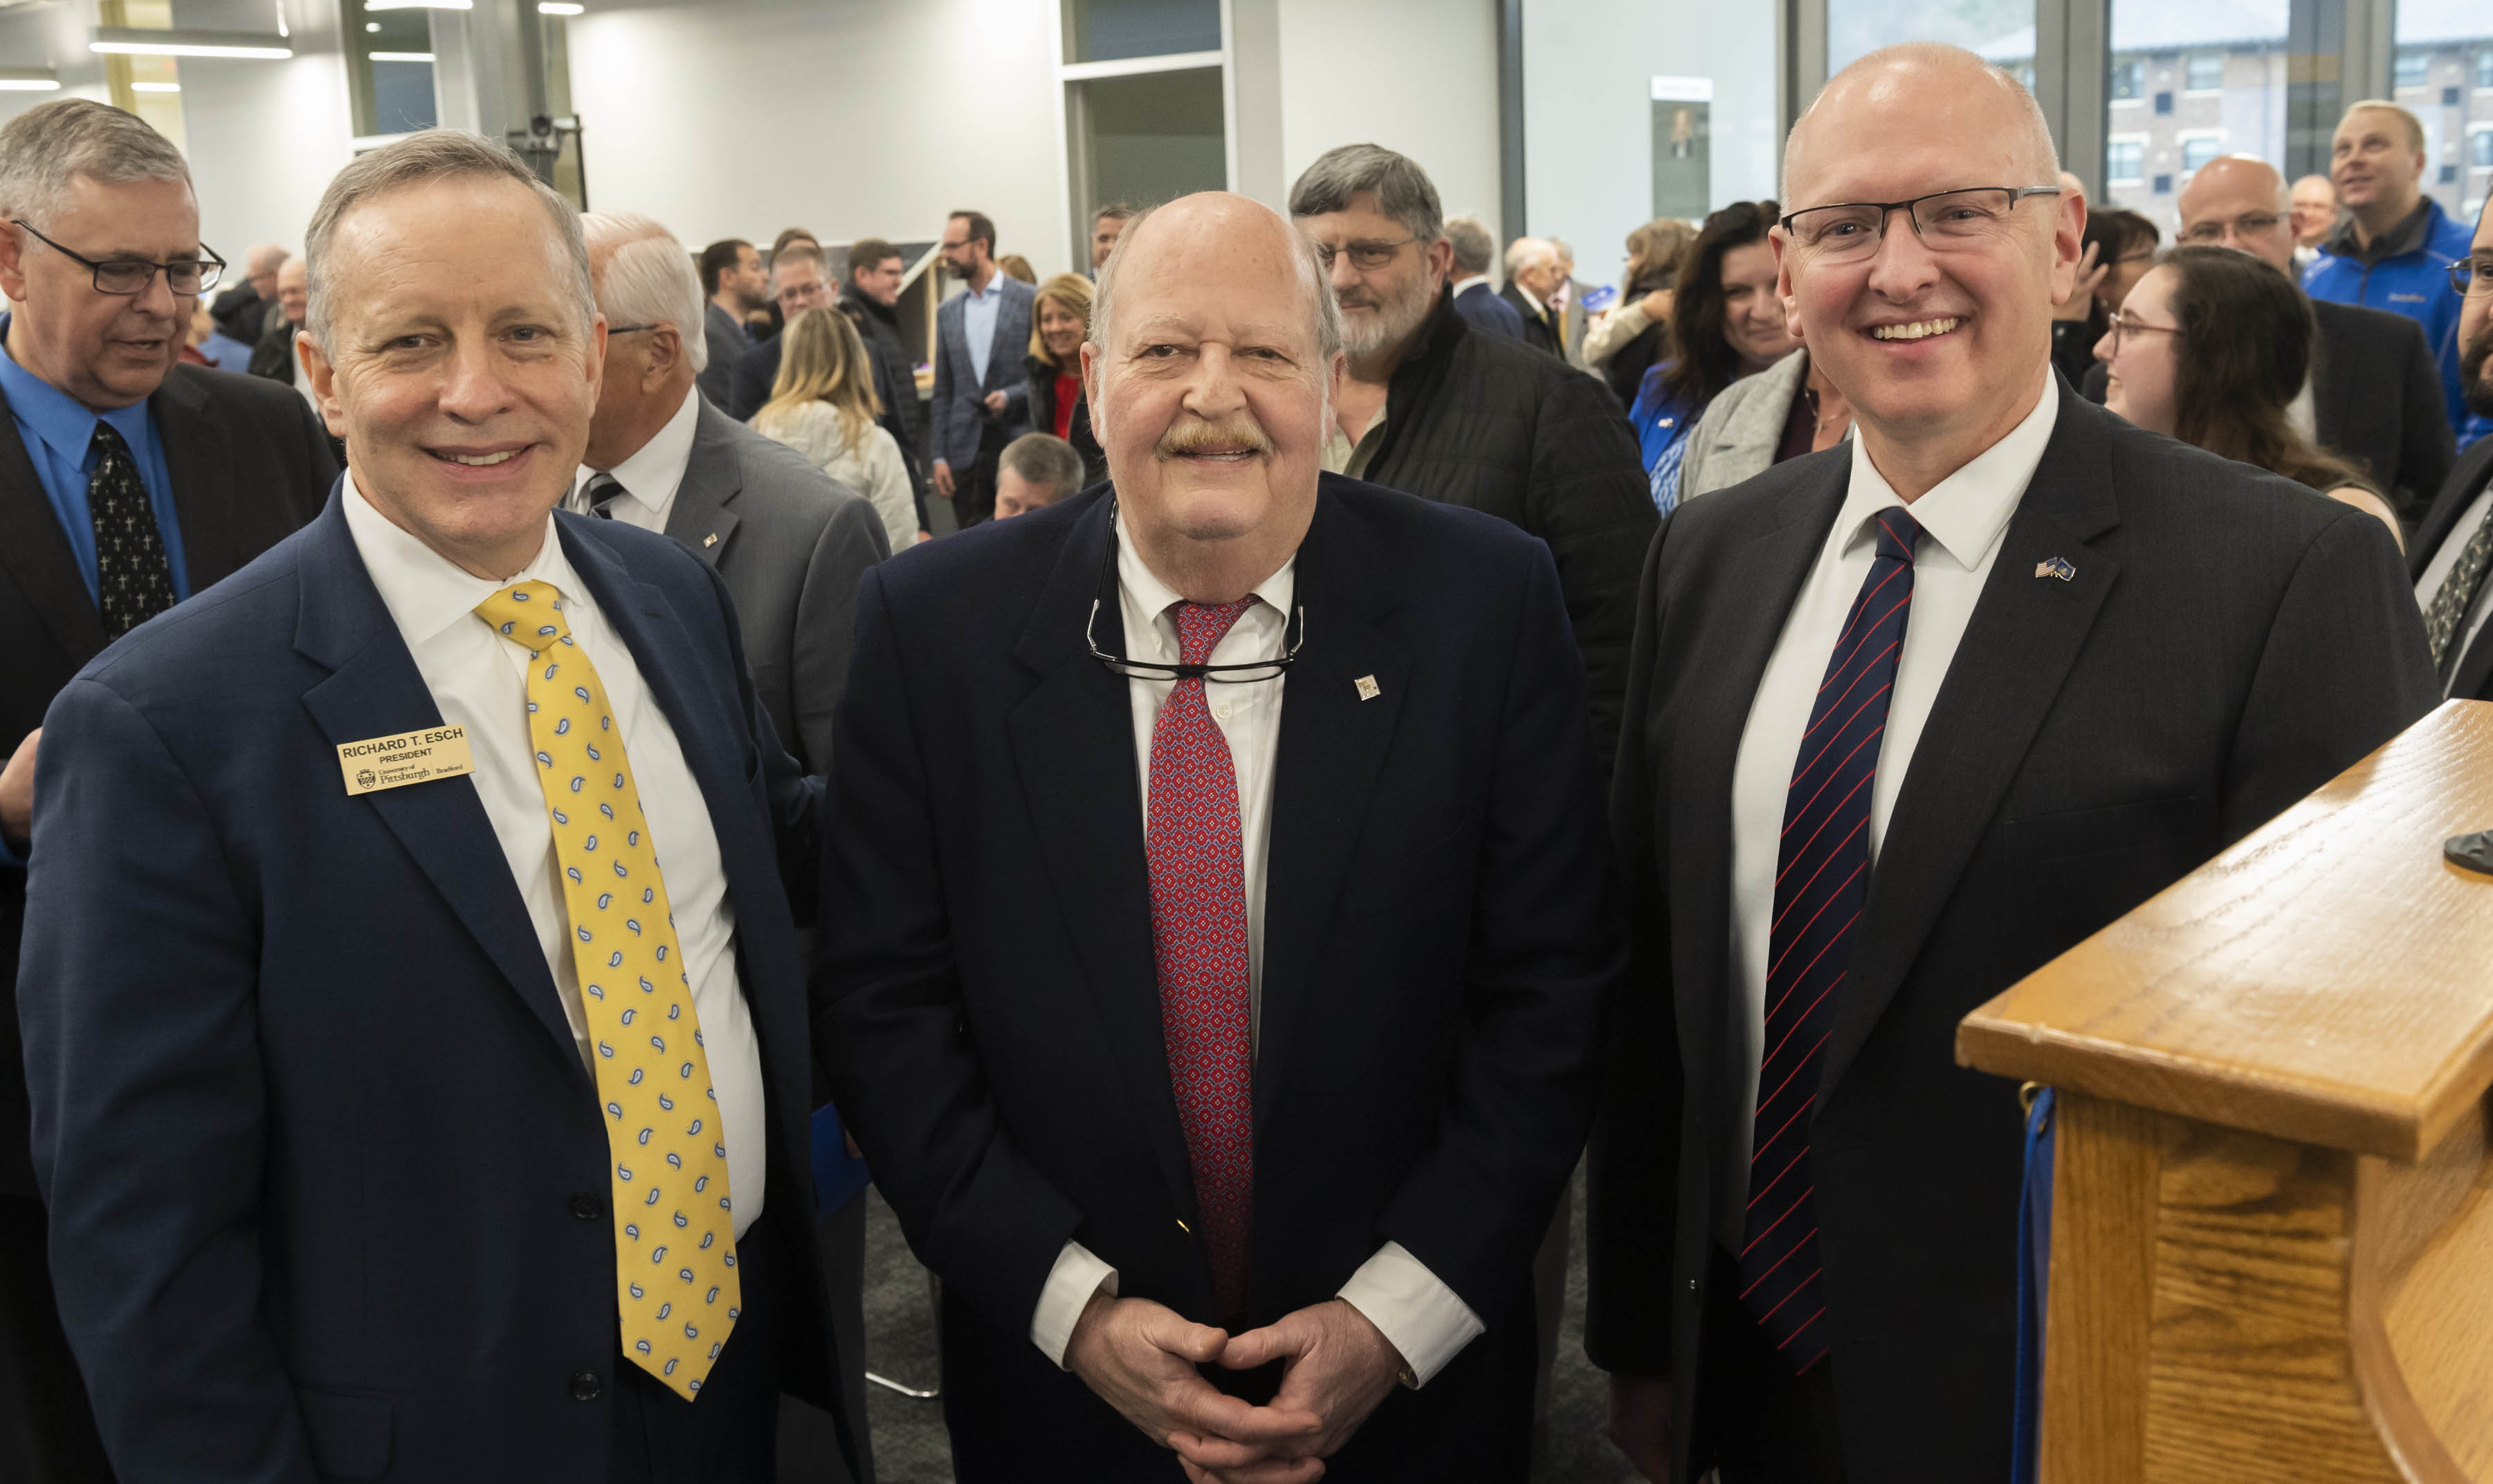 From left, Rick Esch, president of Pitt–Bradford, George B. Duke, owner of Zippo Manufacturing Co., and State Rep. Martin Causer celebrate the dedication of the George B. Duke Engineering and Information Technologies Building at Pitt-Bradford on March 31.